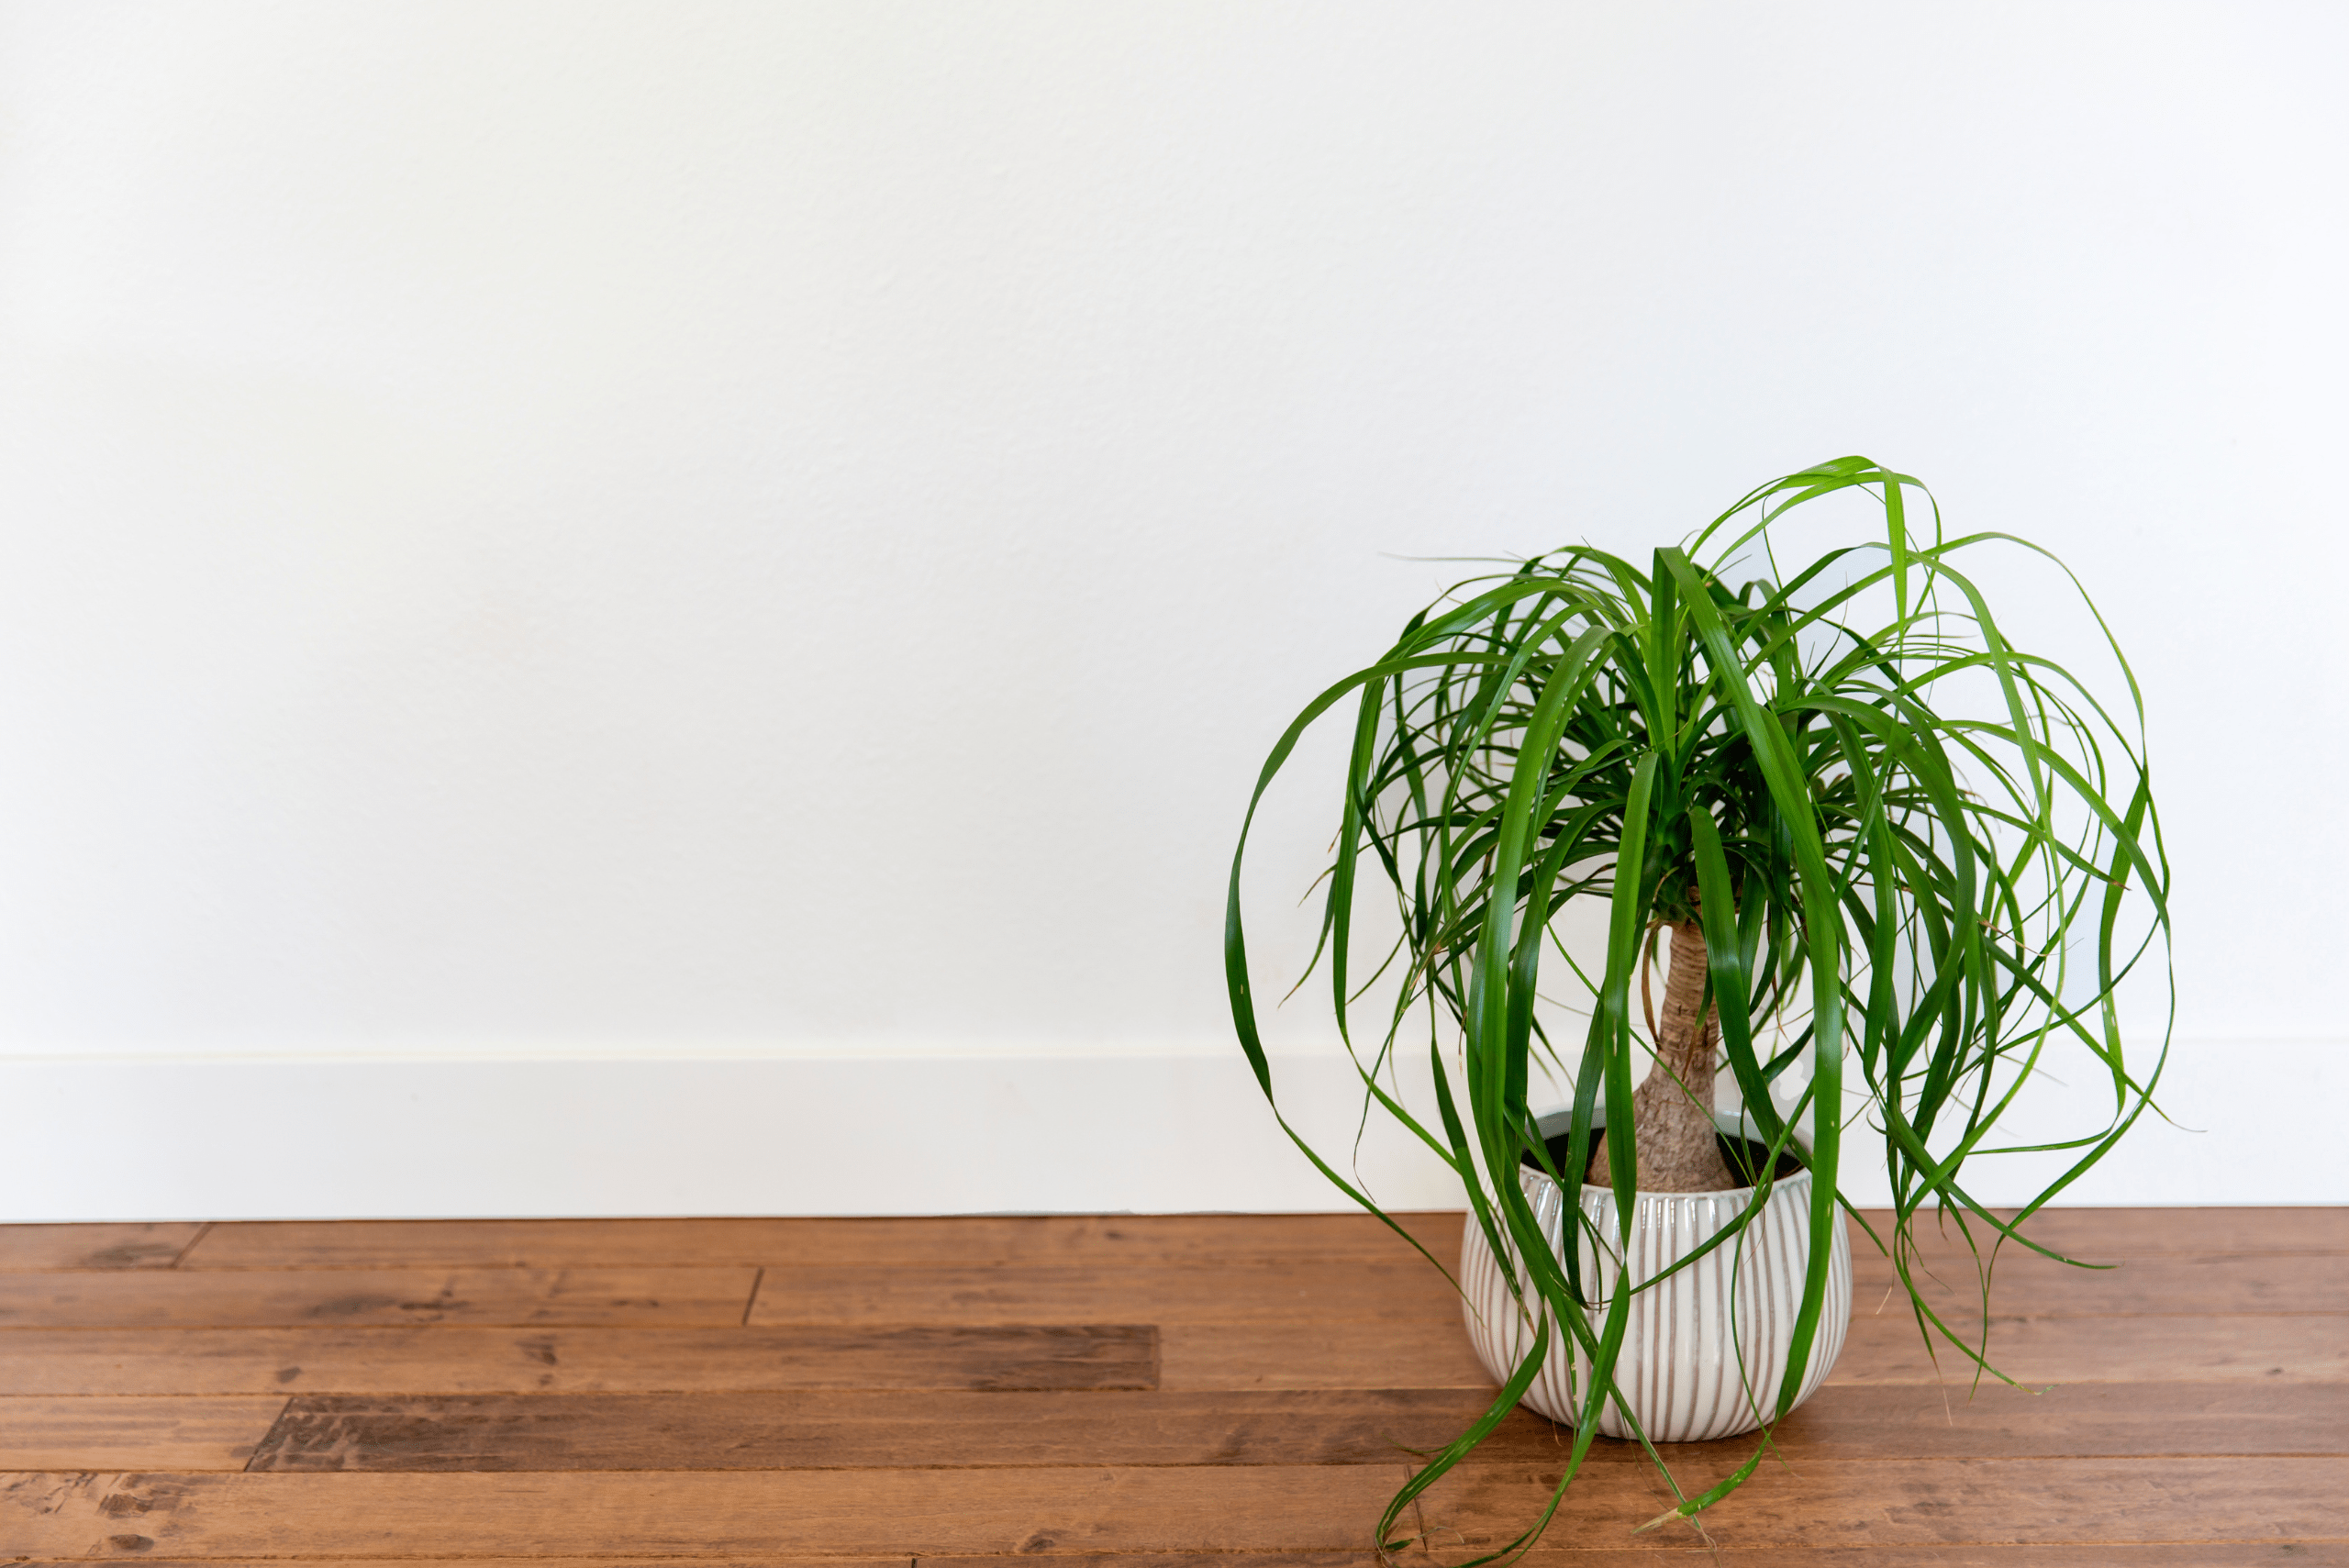 Ponytail Palm in a white pot.